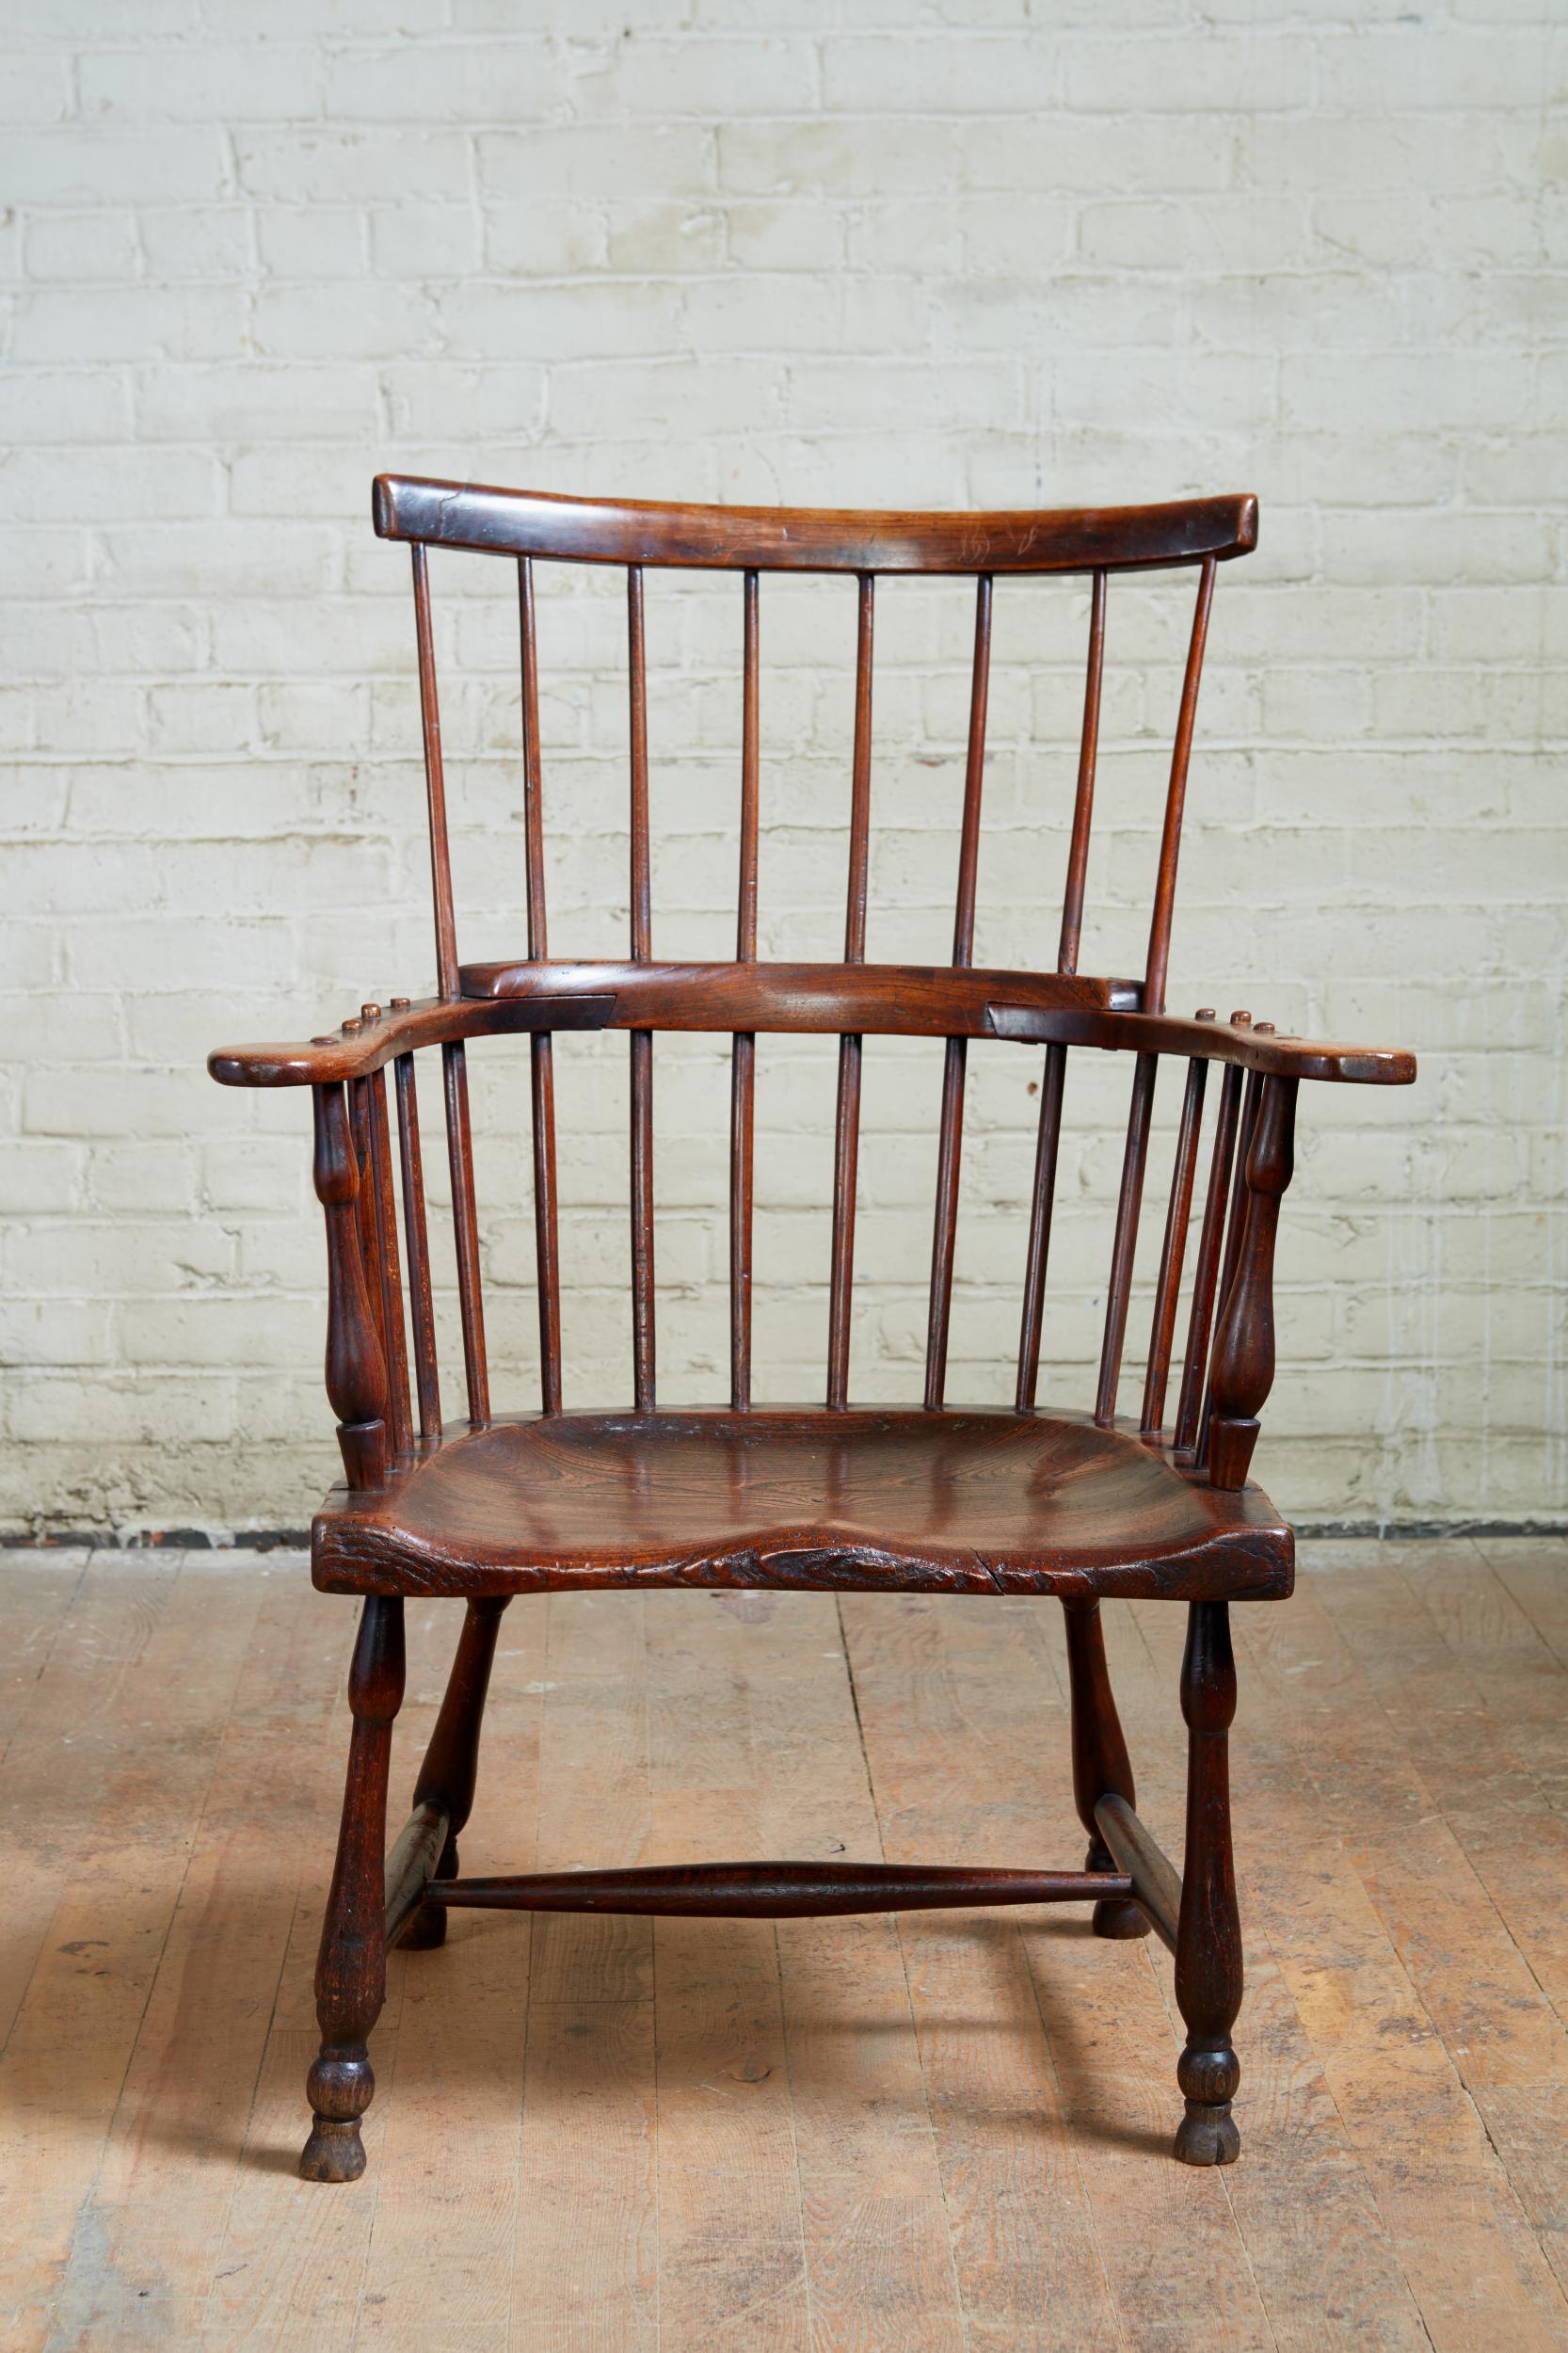 Fine 18th century English comb back Windsor armchair, the shaped crest supported by eight spindles, having scrolled arms with turned supports over deeply saddled 